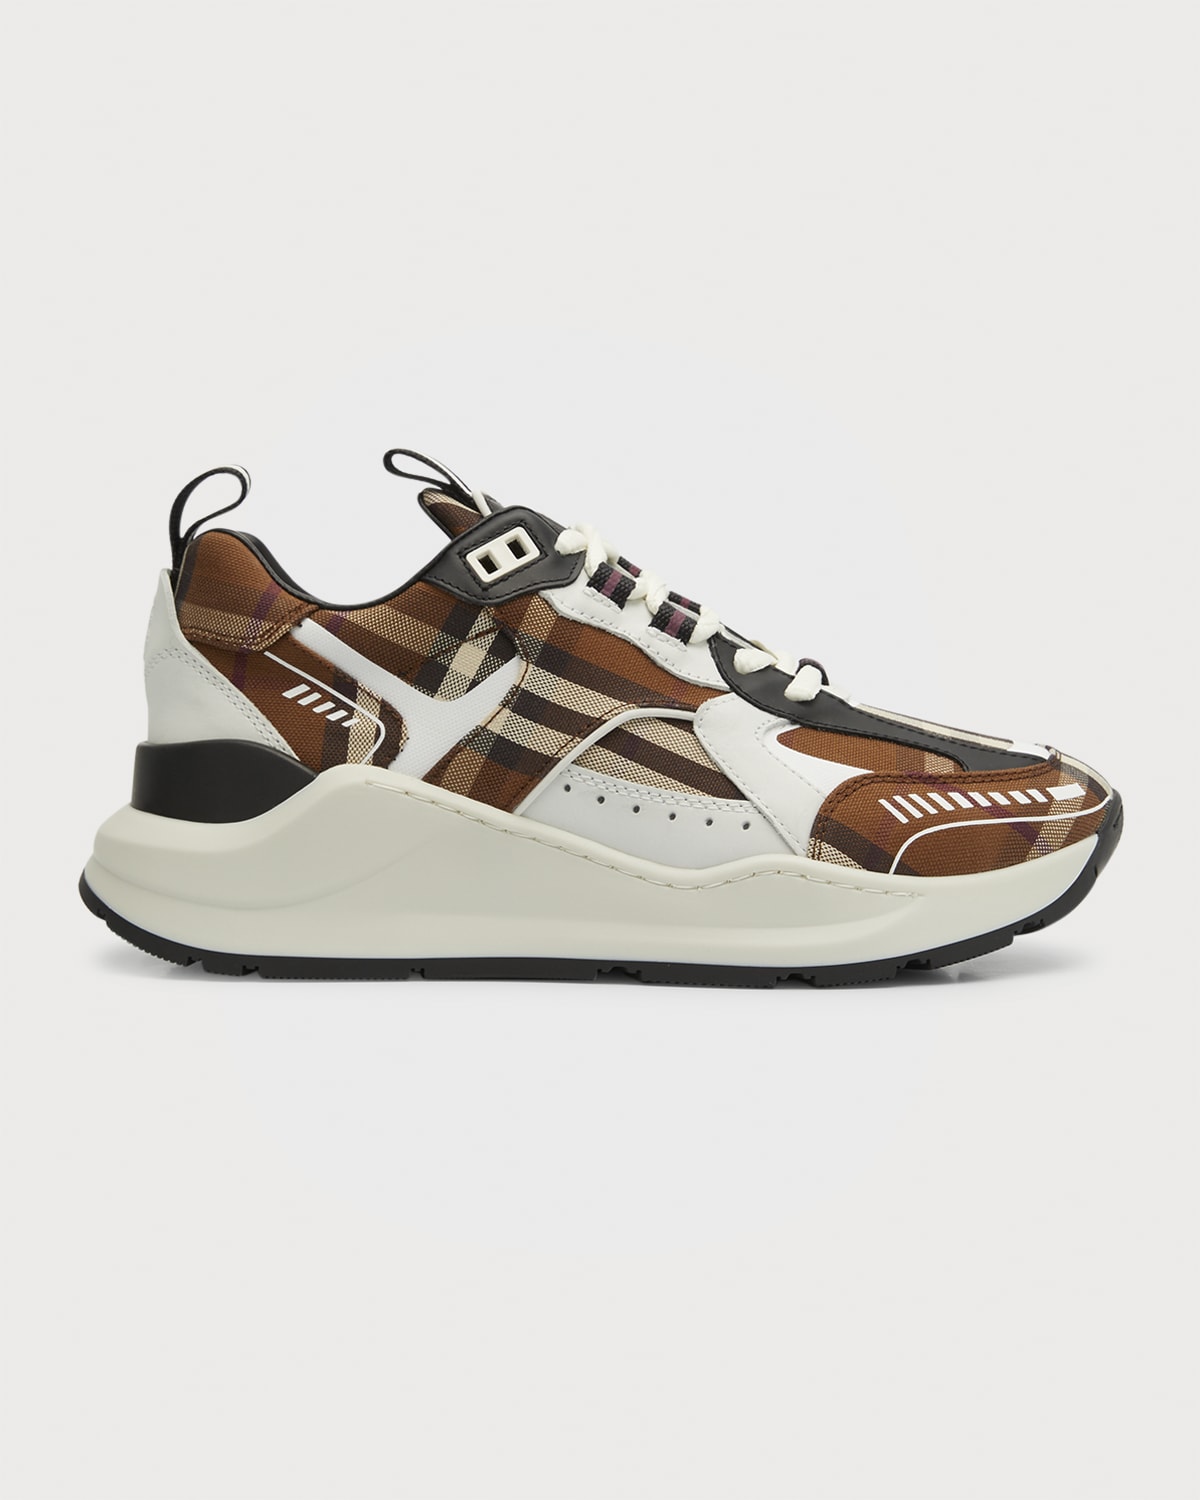 Burberry Sean Vintage Check Chunky Sneakers | Neiman Marcus